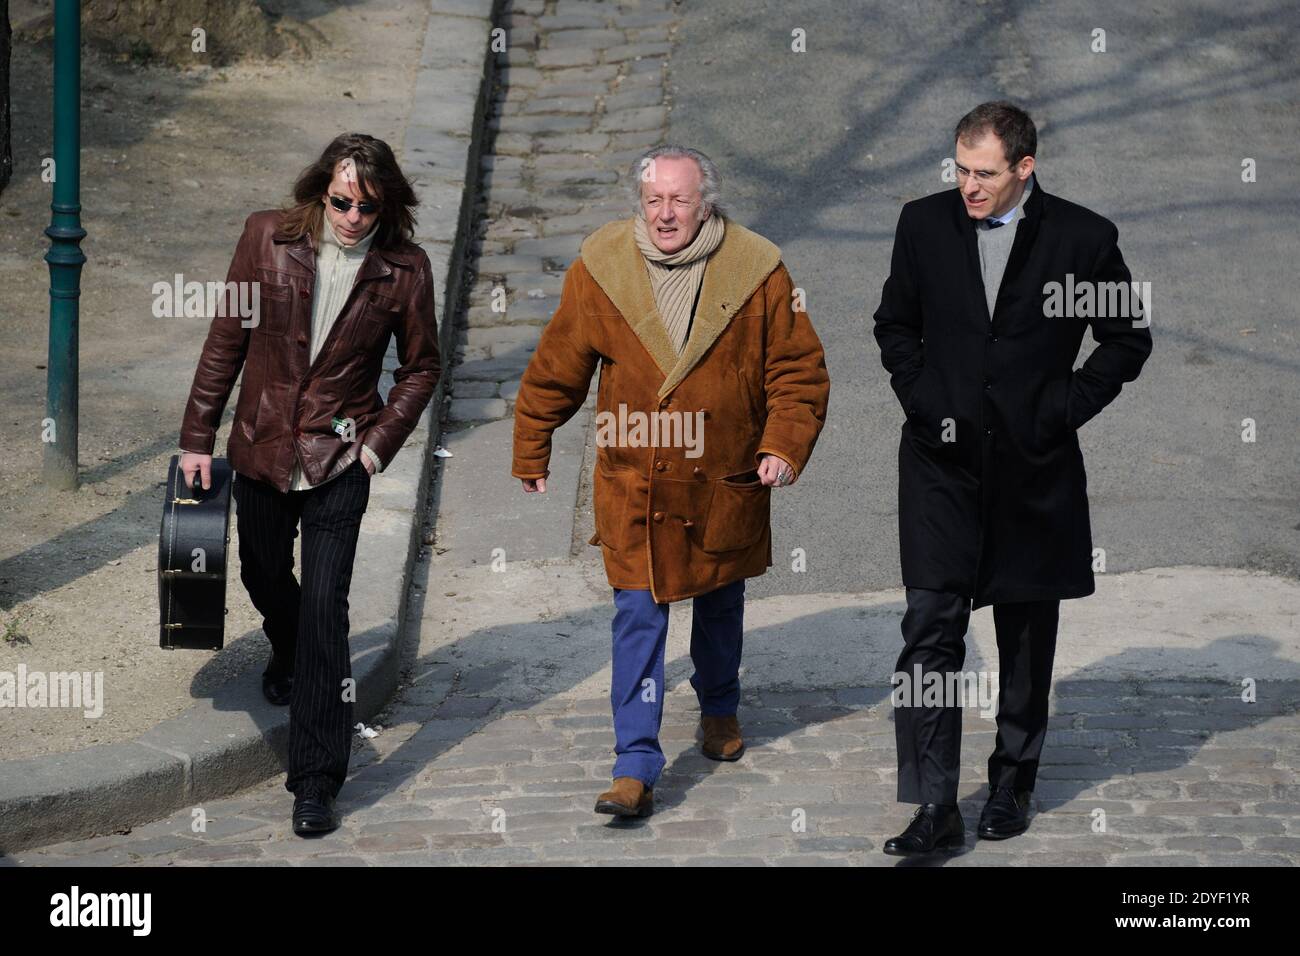 Didier Barbelivien attending the funeral of French editor, novelist, and  director of Stock editions, Jean-Marc Roberts at Montmartre cemetery in  Paris, France on March 29, 2013. Roberts died from cancer aged 58